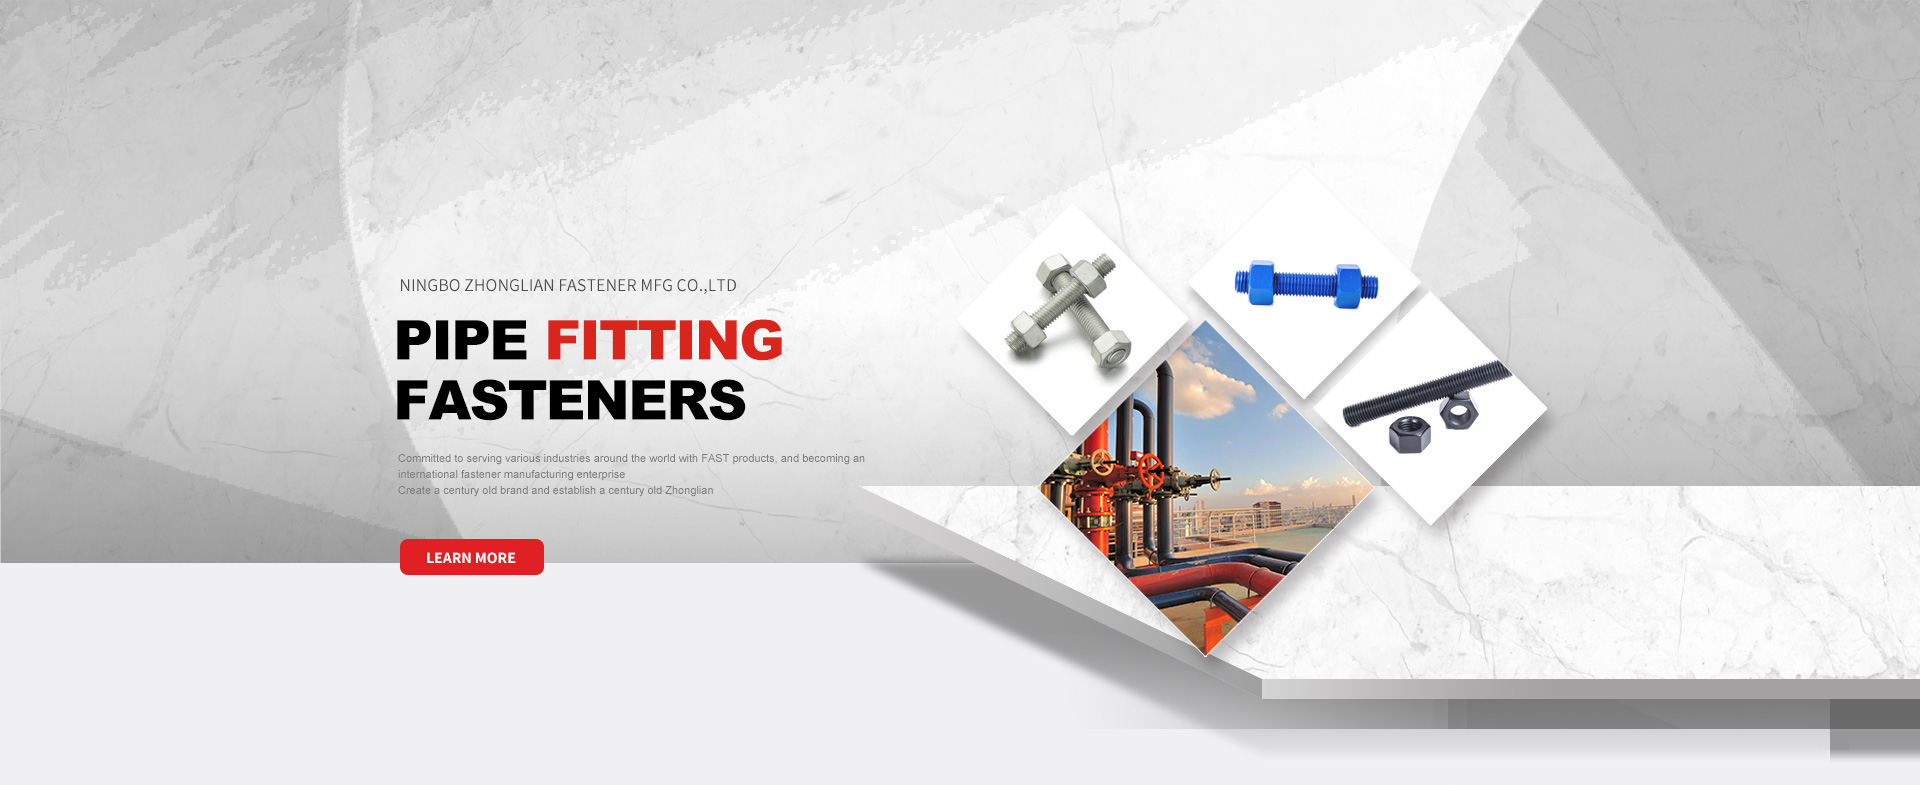 Pipe Fitting Fasteners